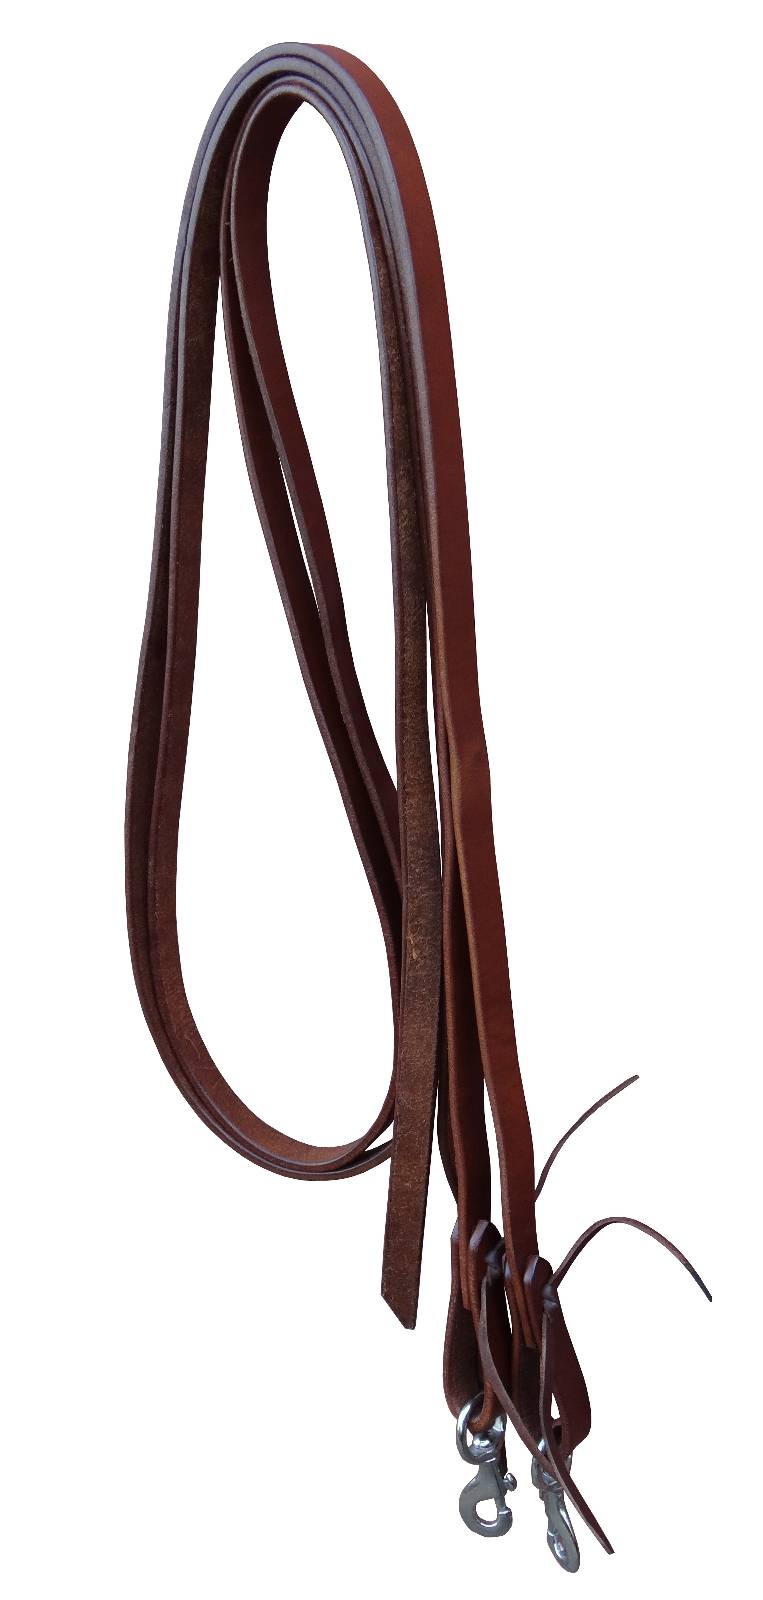 NEW HORSE TACK! Showman USA MADE 8' x 5/8" Western Leather Split Reins